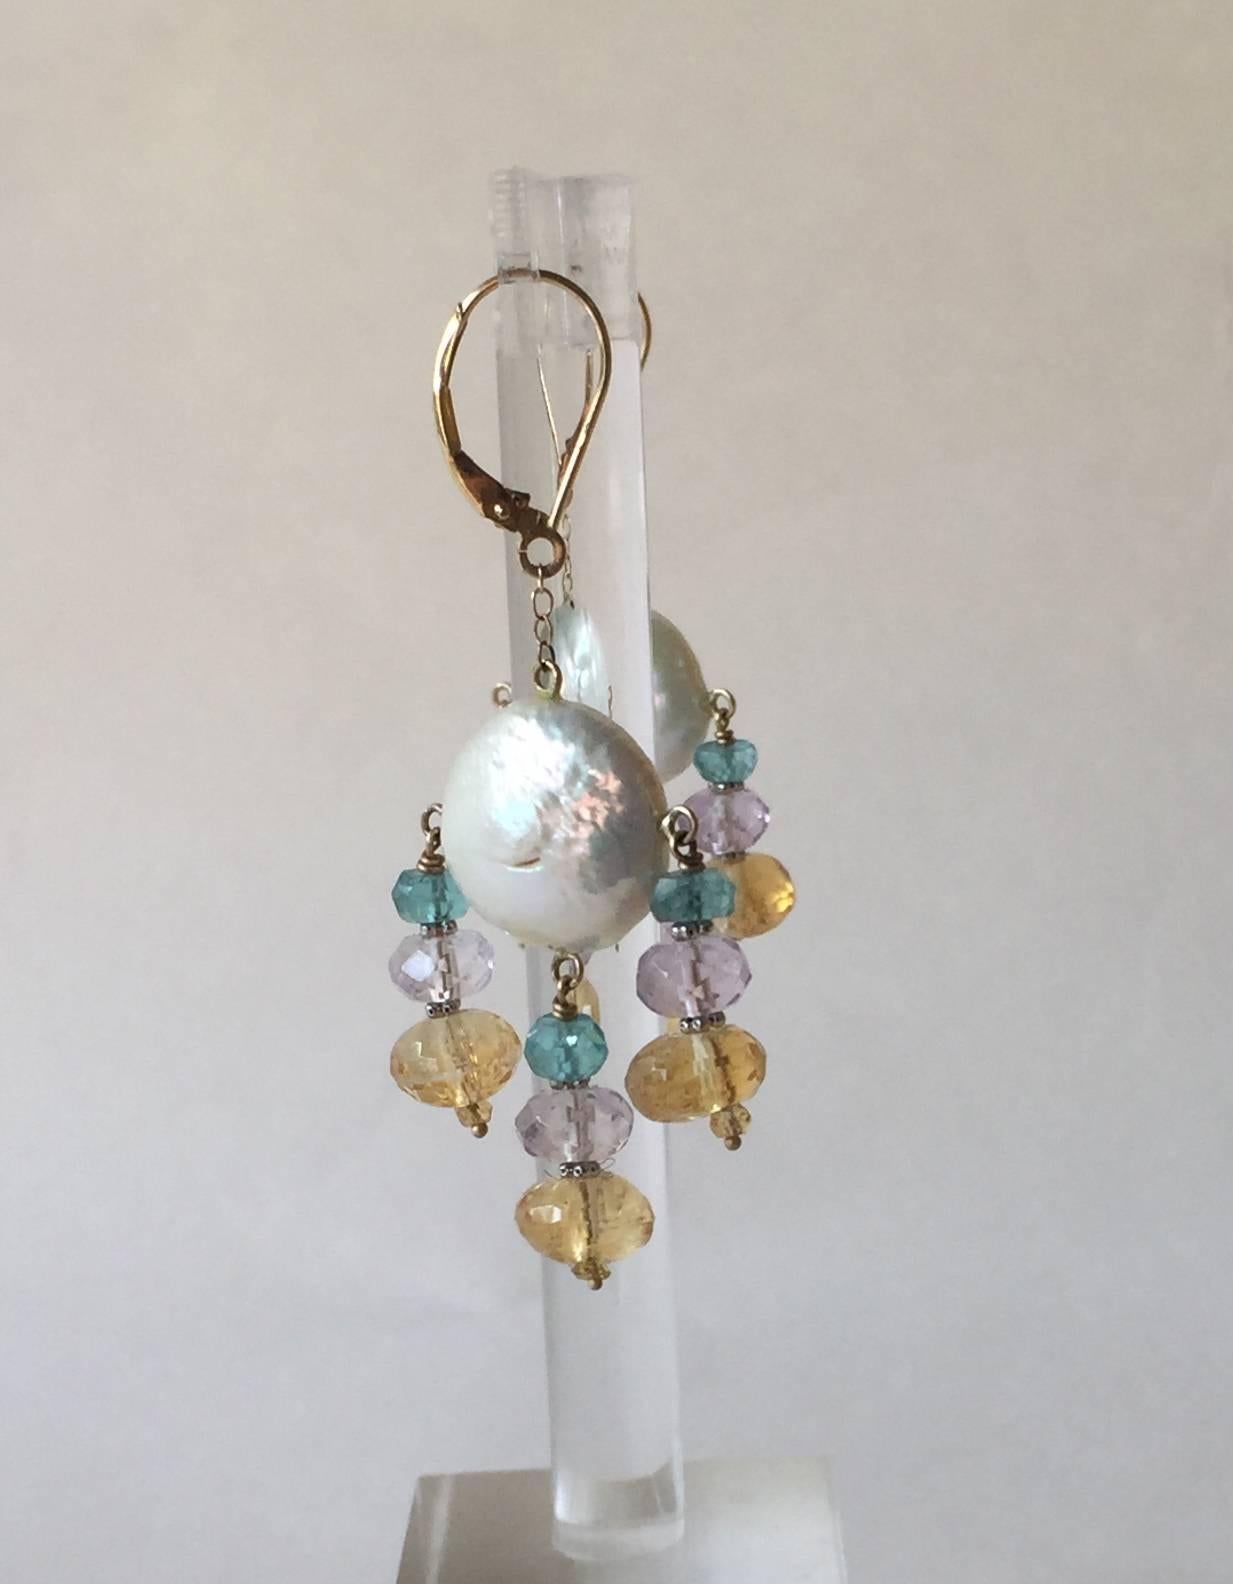 These fun and whimsical earrings are composed of graduated and faceted blue topaz, amethyst. and citrine. Highlighting the shine of the stones are small 14k white gold beads. Completing these elegant and light earrings are coin pearls and 14k yellow